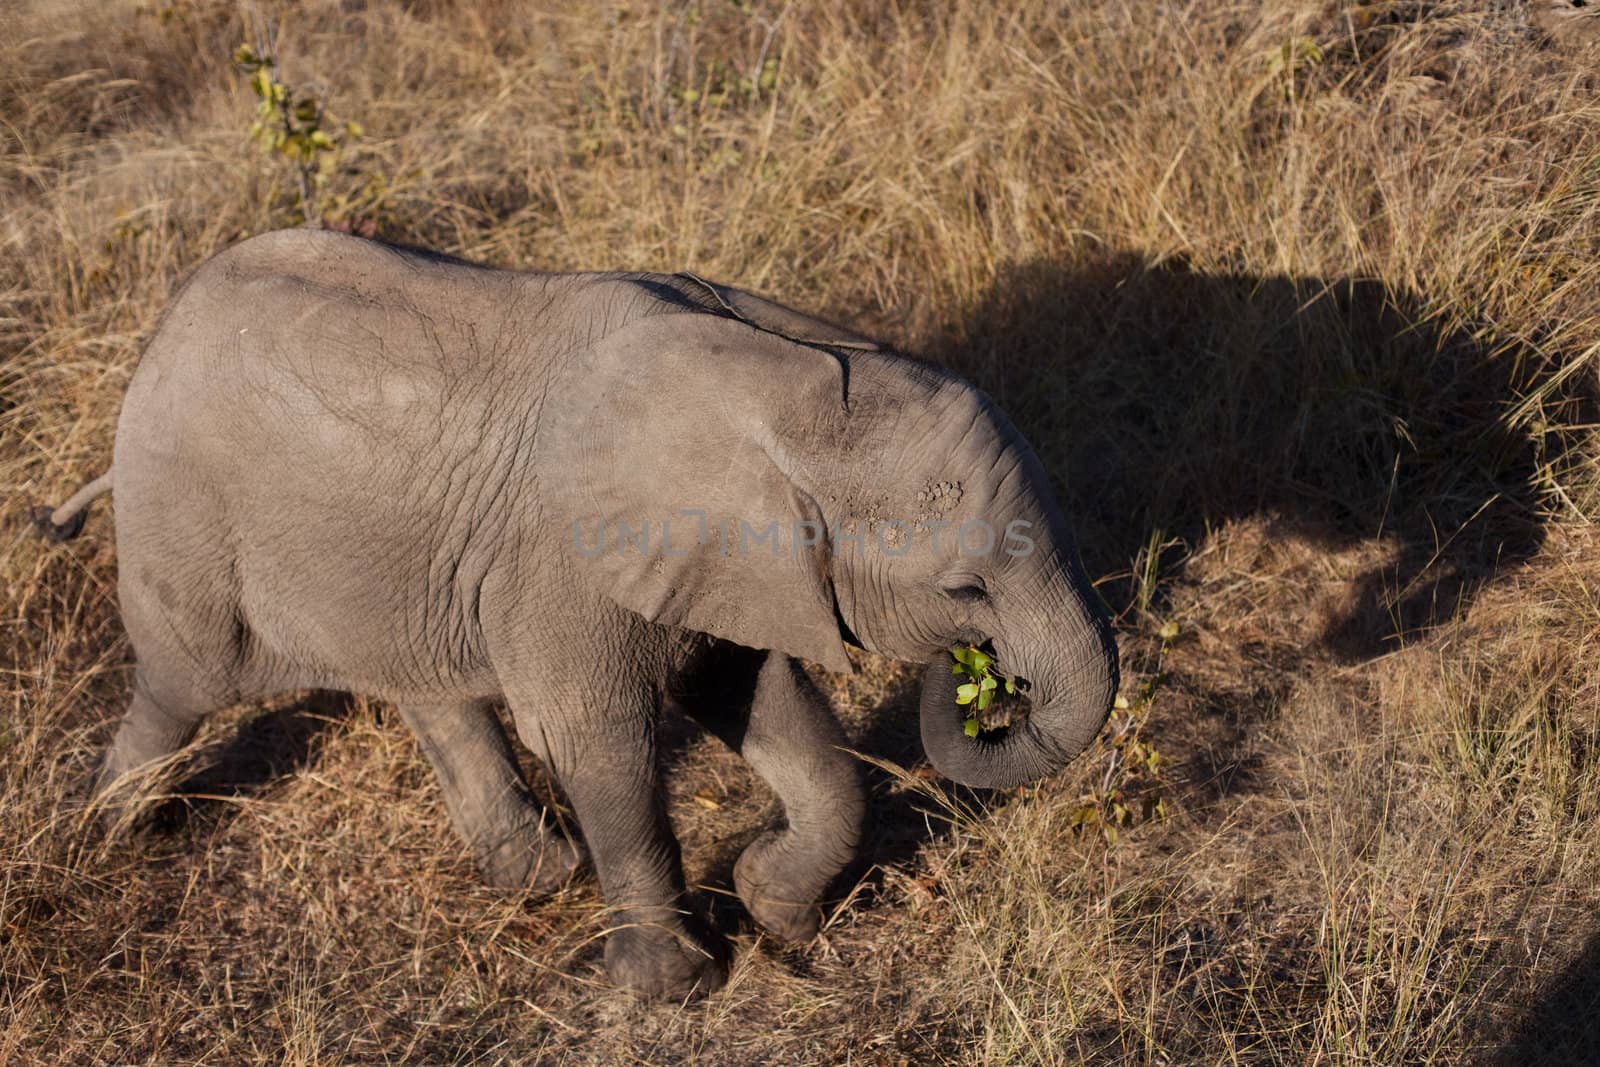 High angle view of BABY AFRICAN ELEPHANT (Loxodonta africana)